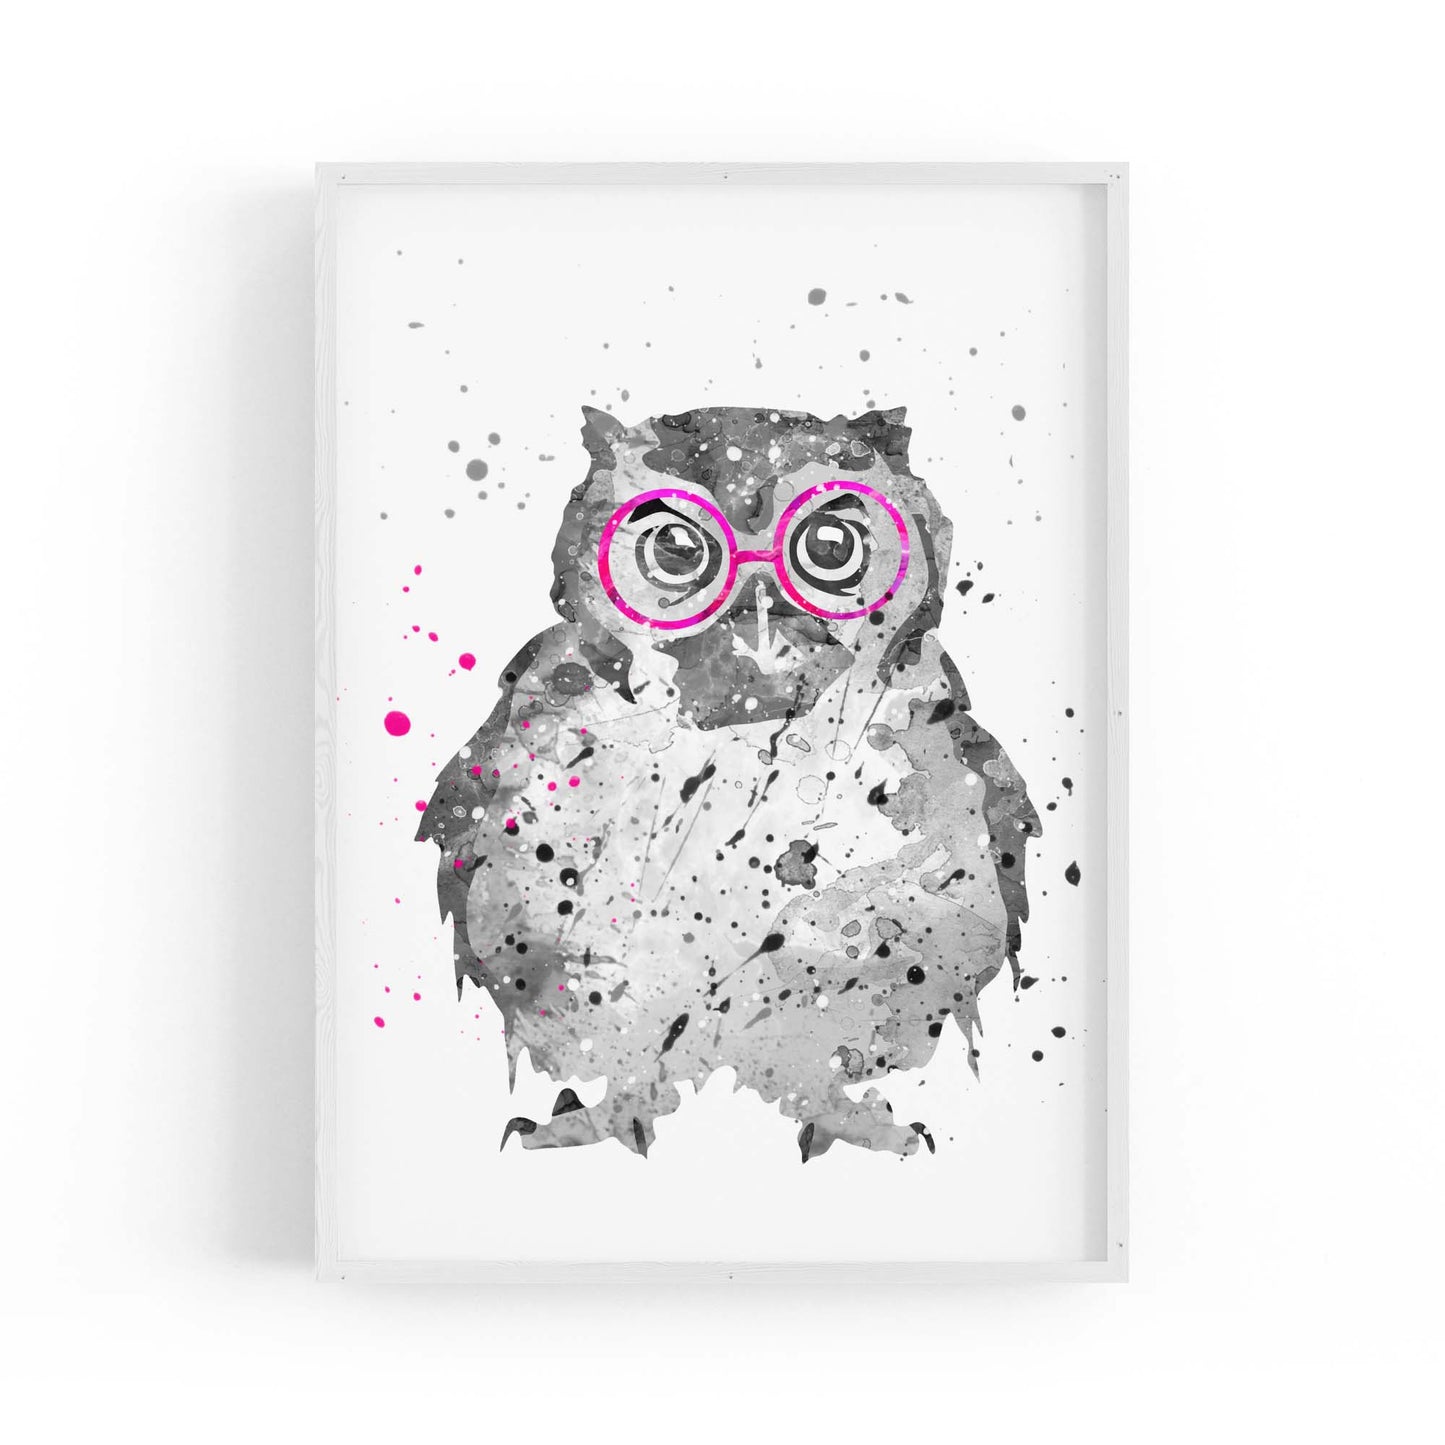 Owl with Glasses Nursery Animal Bedroom Wall Art - The Affordable Art Company